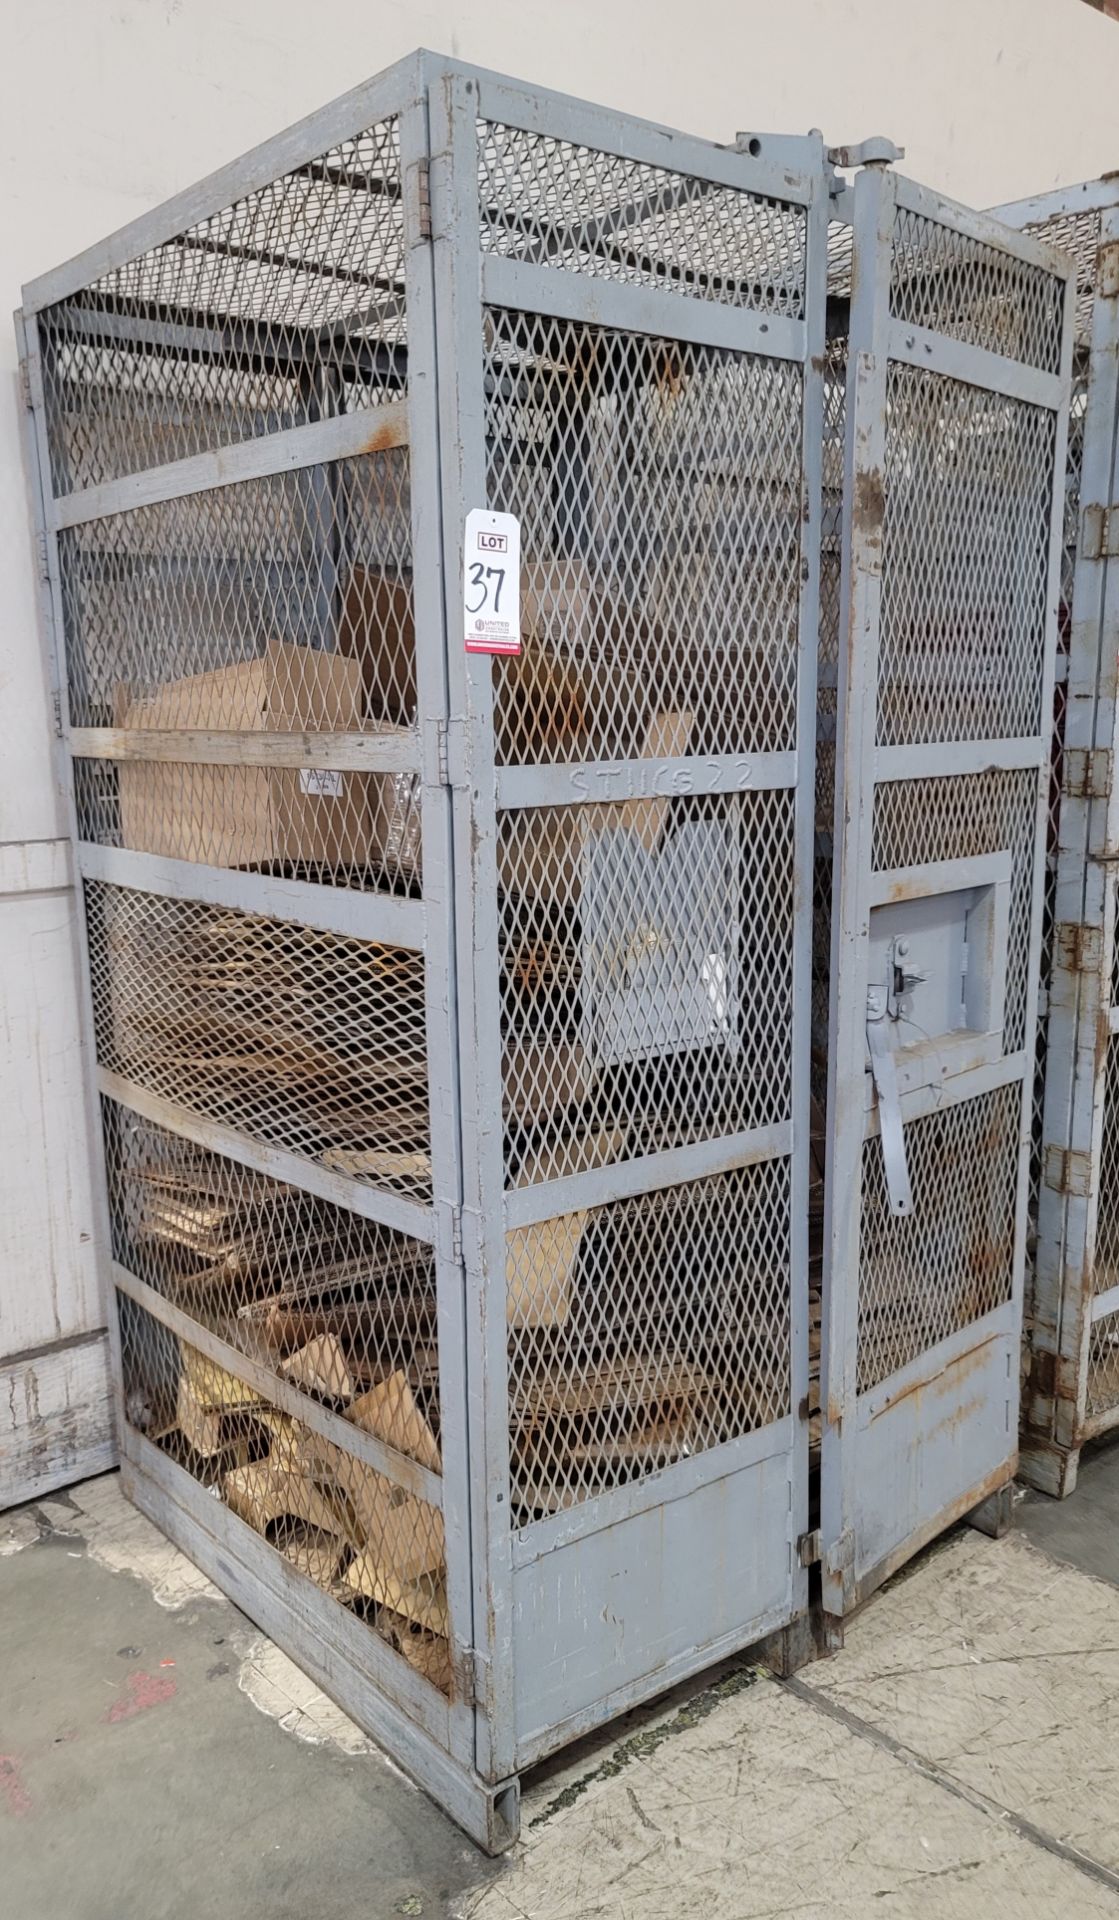 STEEL SECURITY CAGE, 4' X 4' X 7-1/2' HT